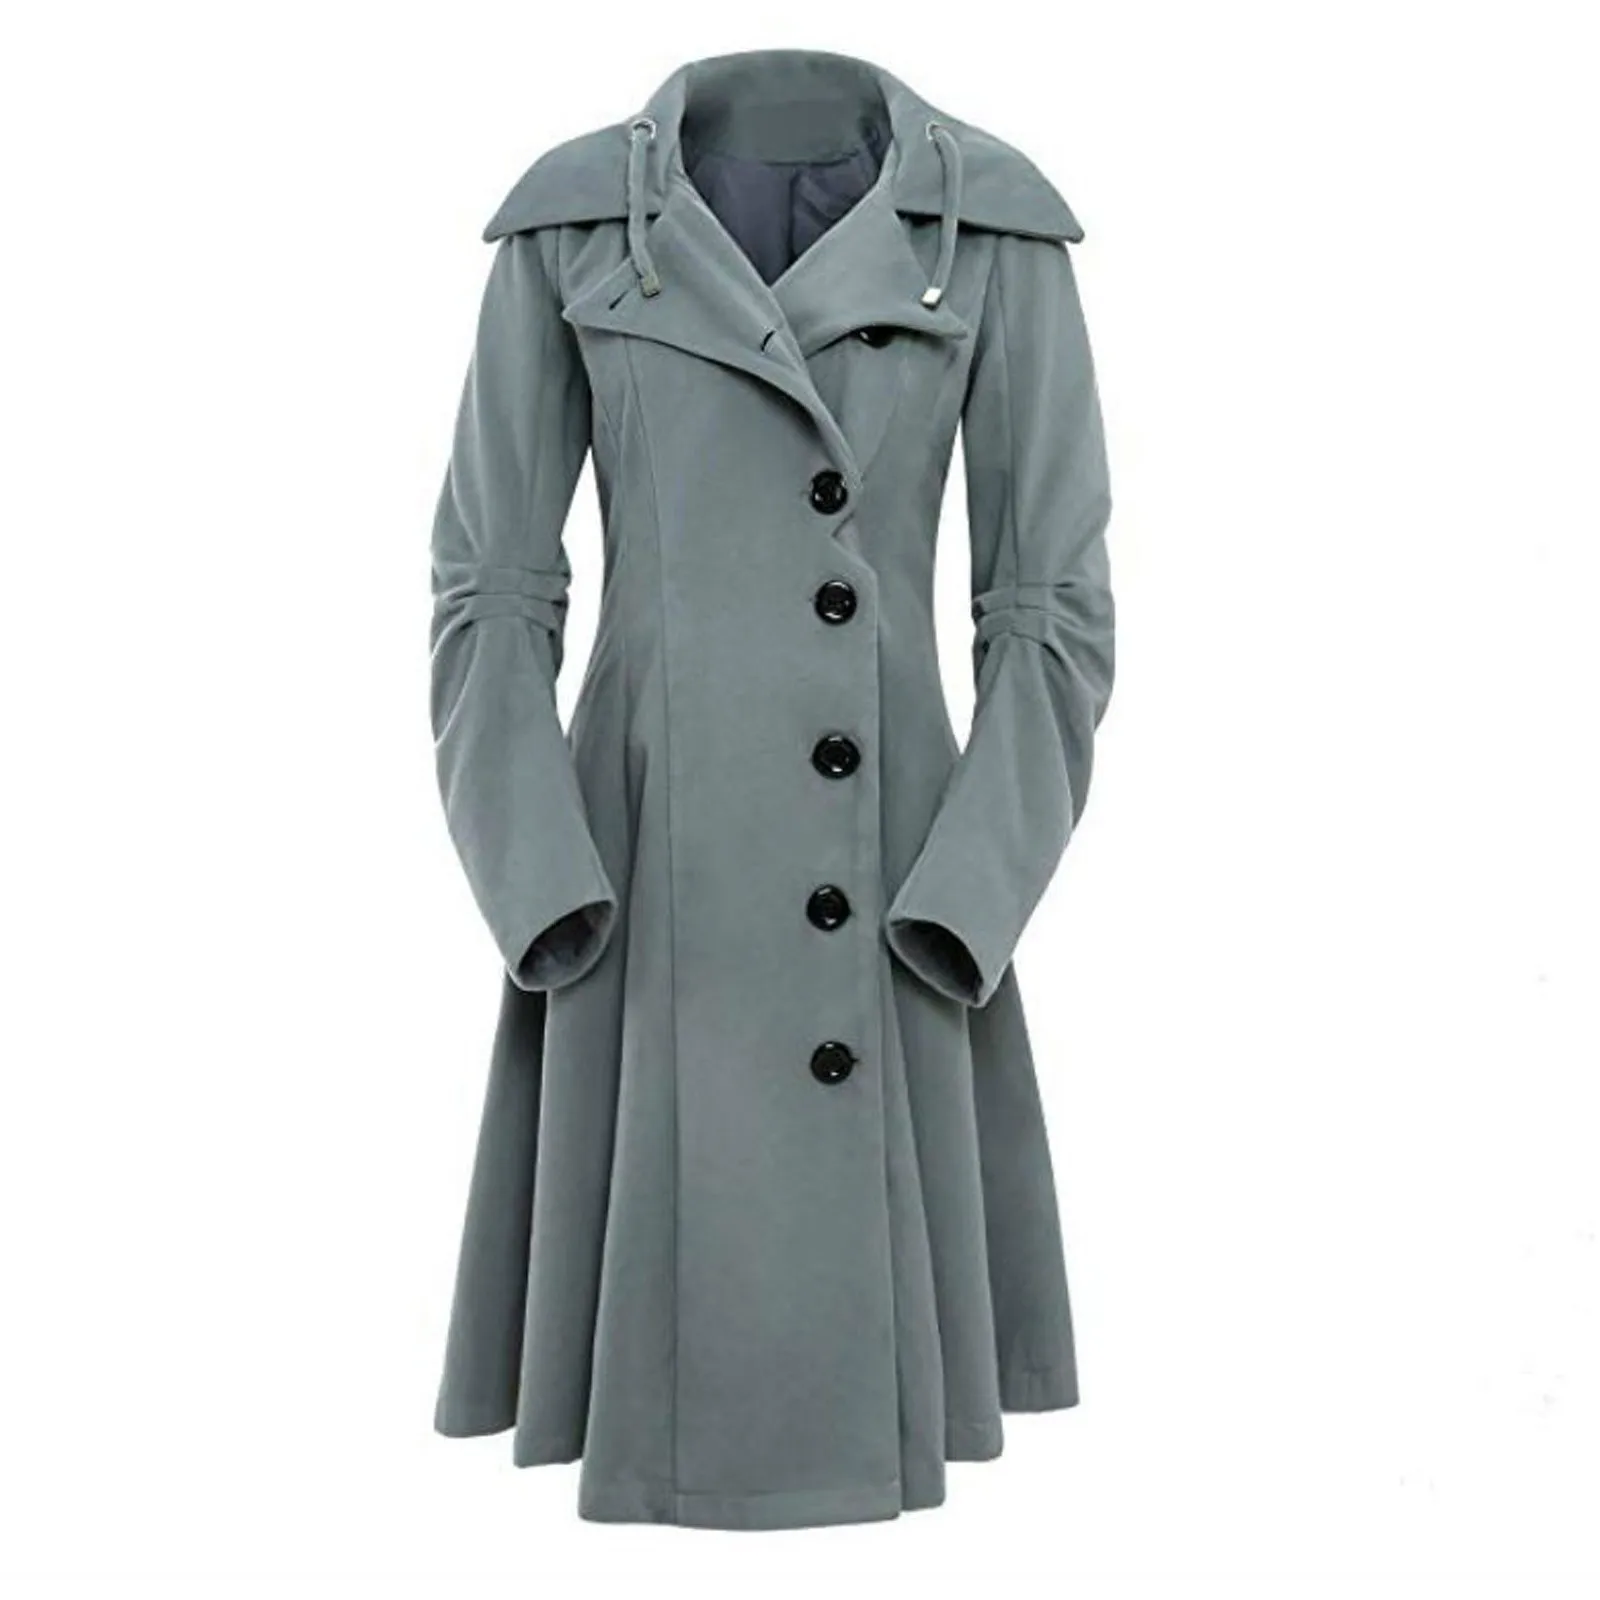 

Women Long Winter Coat Faux Wool Warm Slim Hooded Long Jacket Thick-Parka Overcoat Casual Outwear Abrigos Mujer Invierno#20